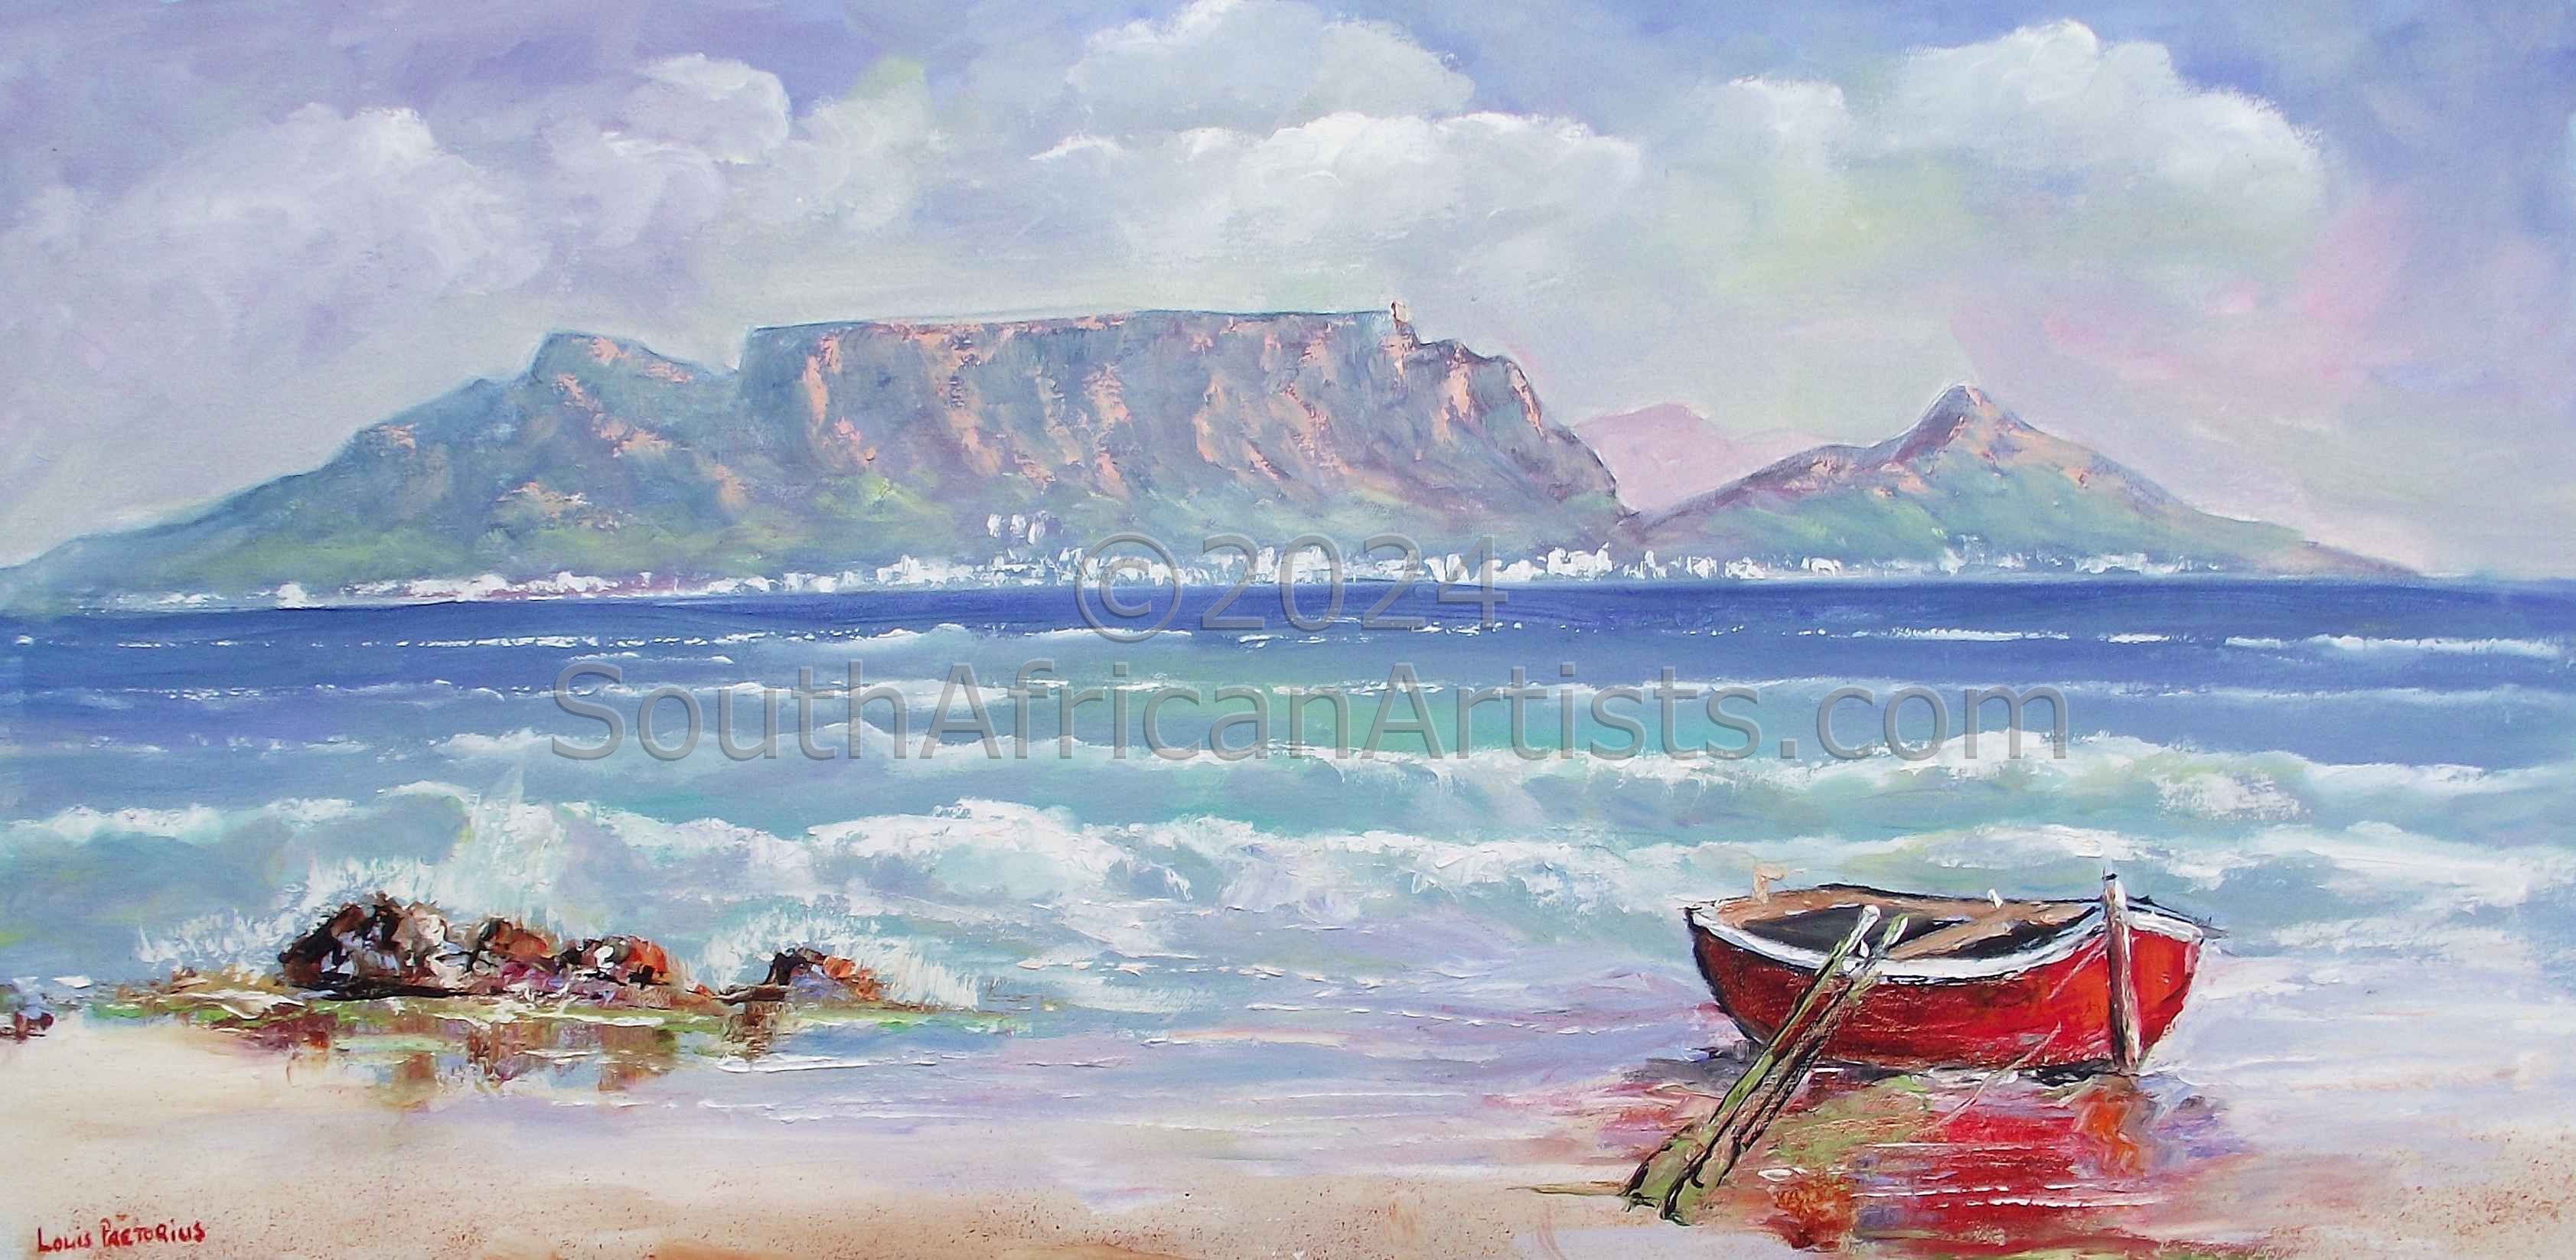 Table Mountain with Resting Red Boat